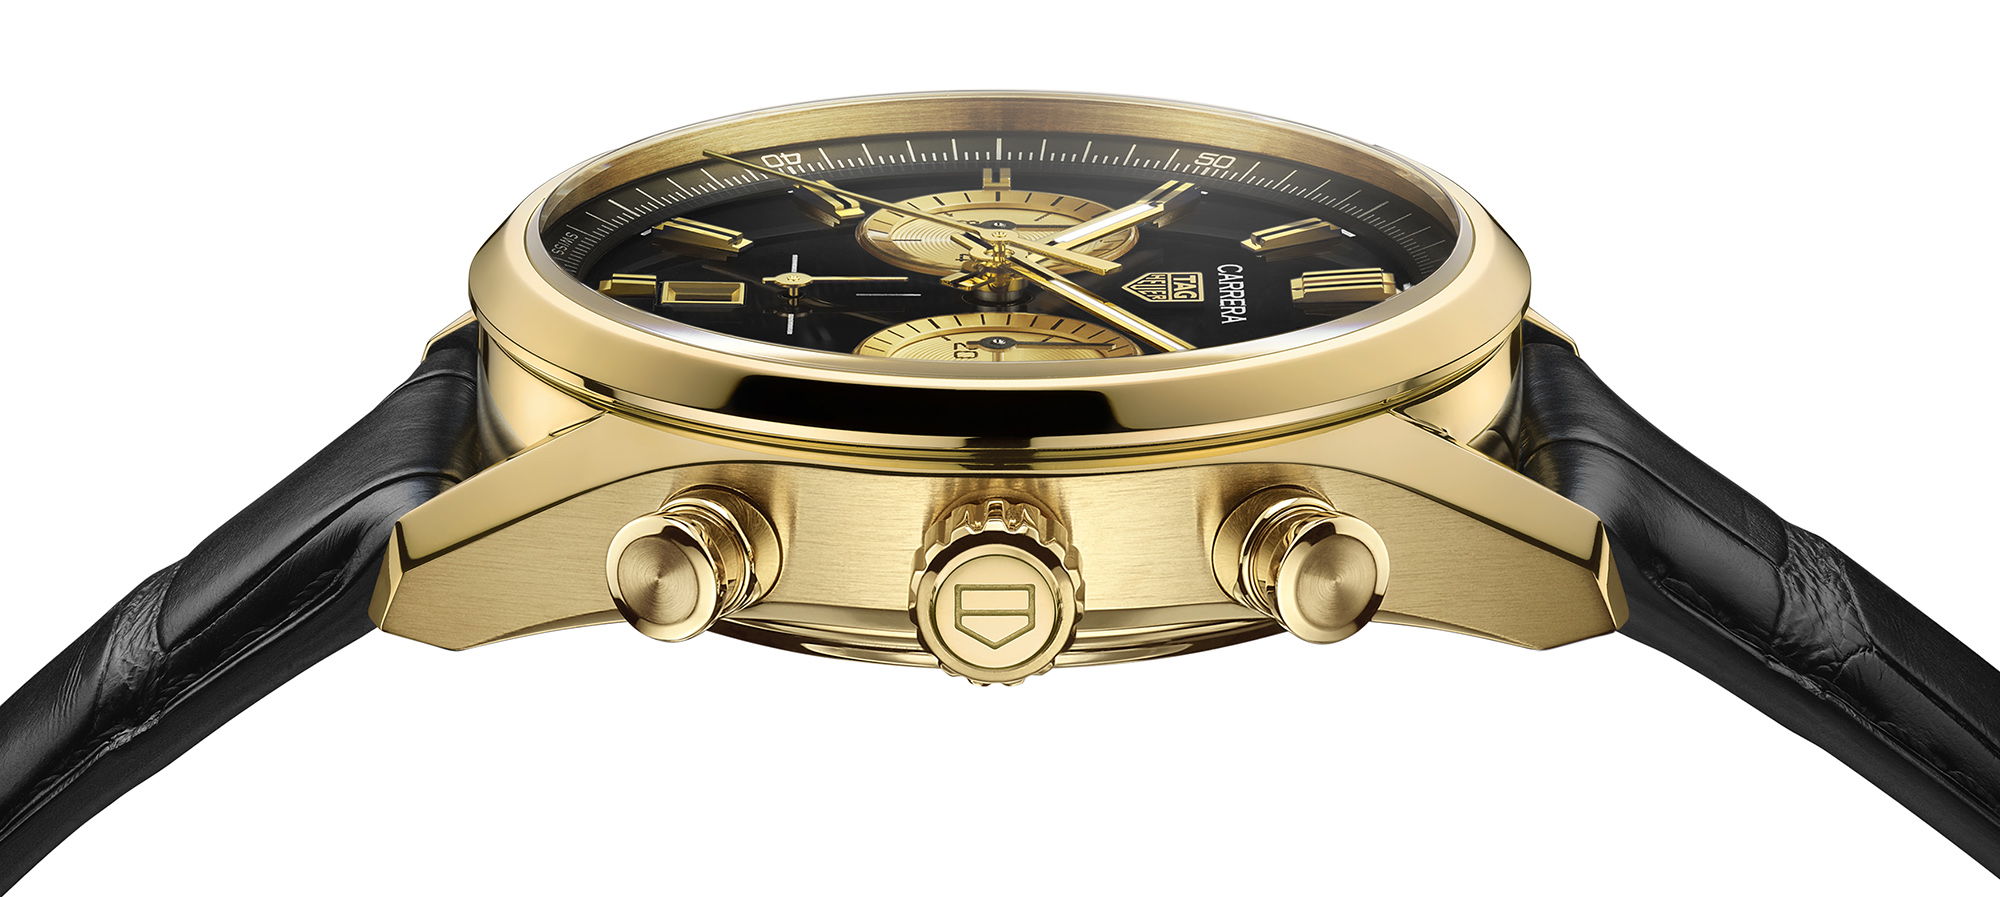 TAG Heuer Unveils Carrera Chronograph Watch In Black And Gold | aBlogtoWatch